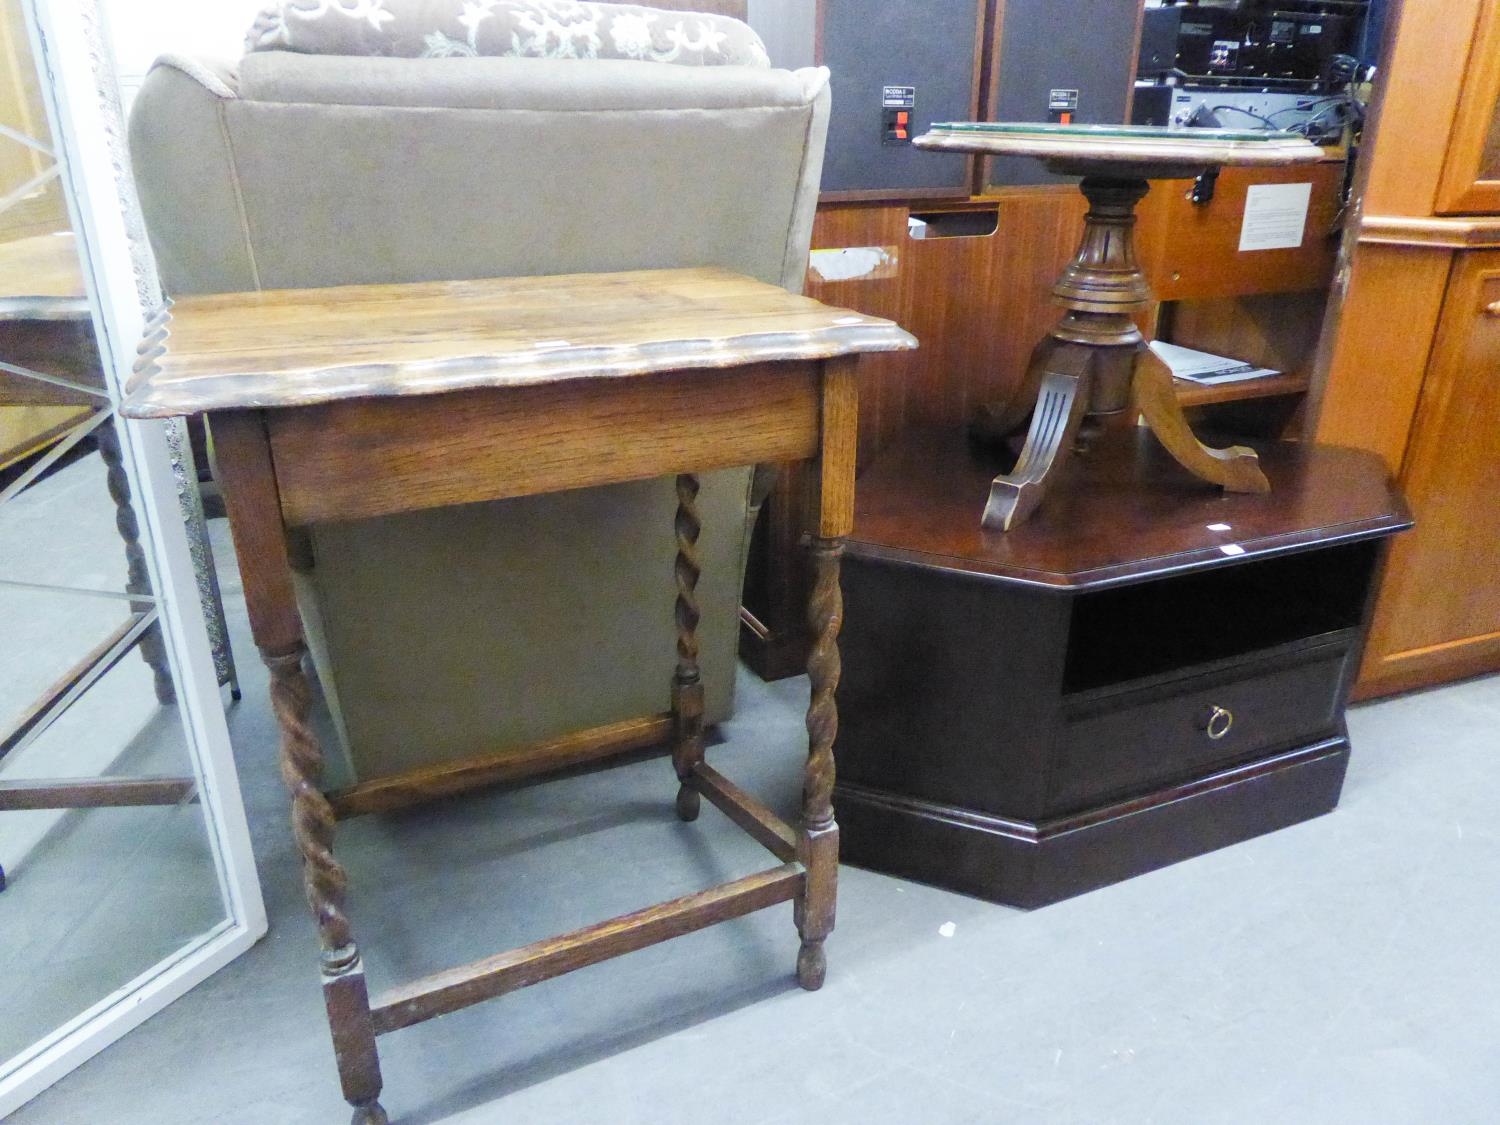 AN OBLONG MAHOGANY OCCASIONAL TABLE, WITH DROP-LEAF SIDES AND UNDER TIER, RAISED ON TURNED